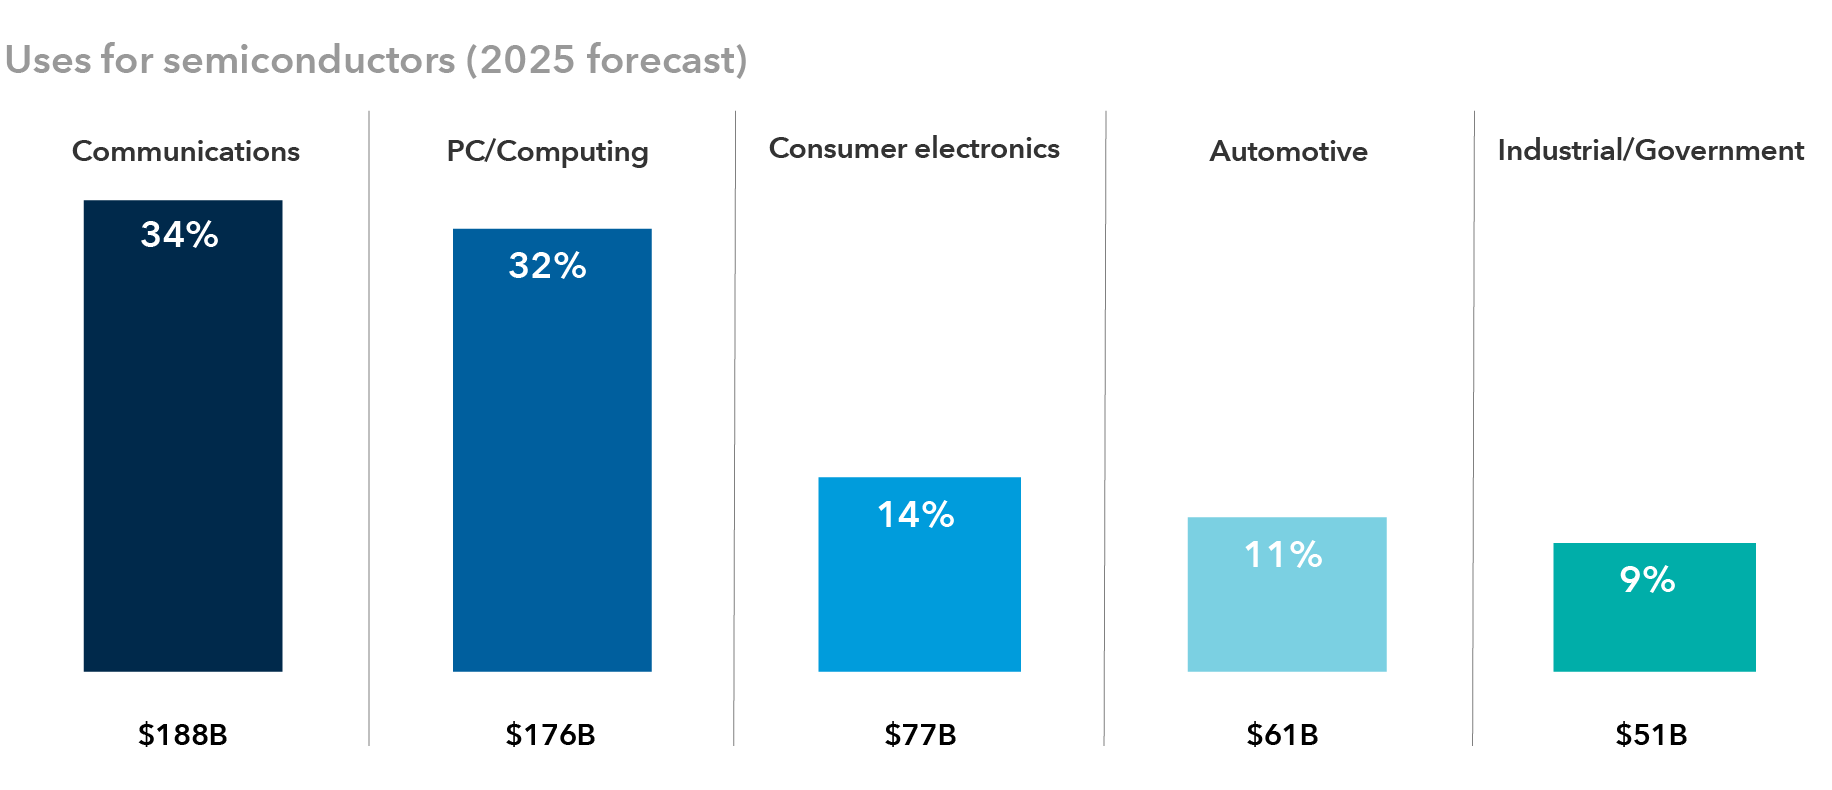 Uses for semiconductors (2025 forecast)